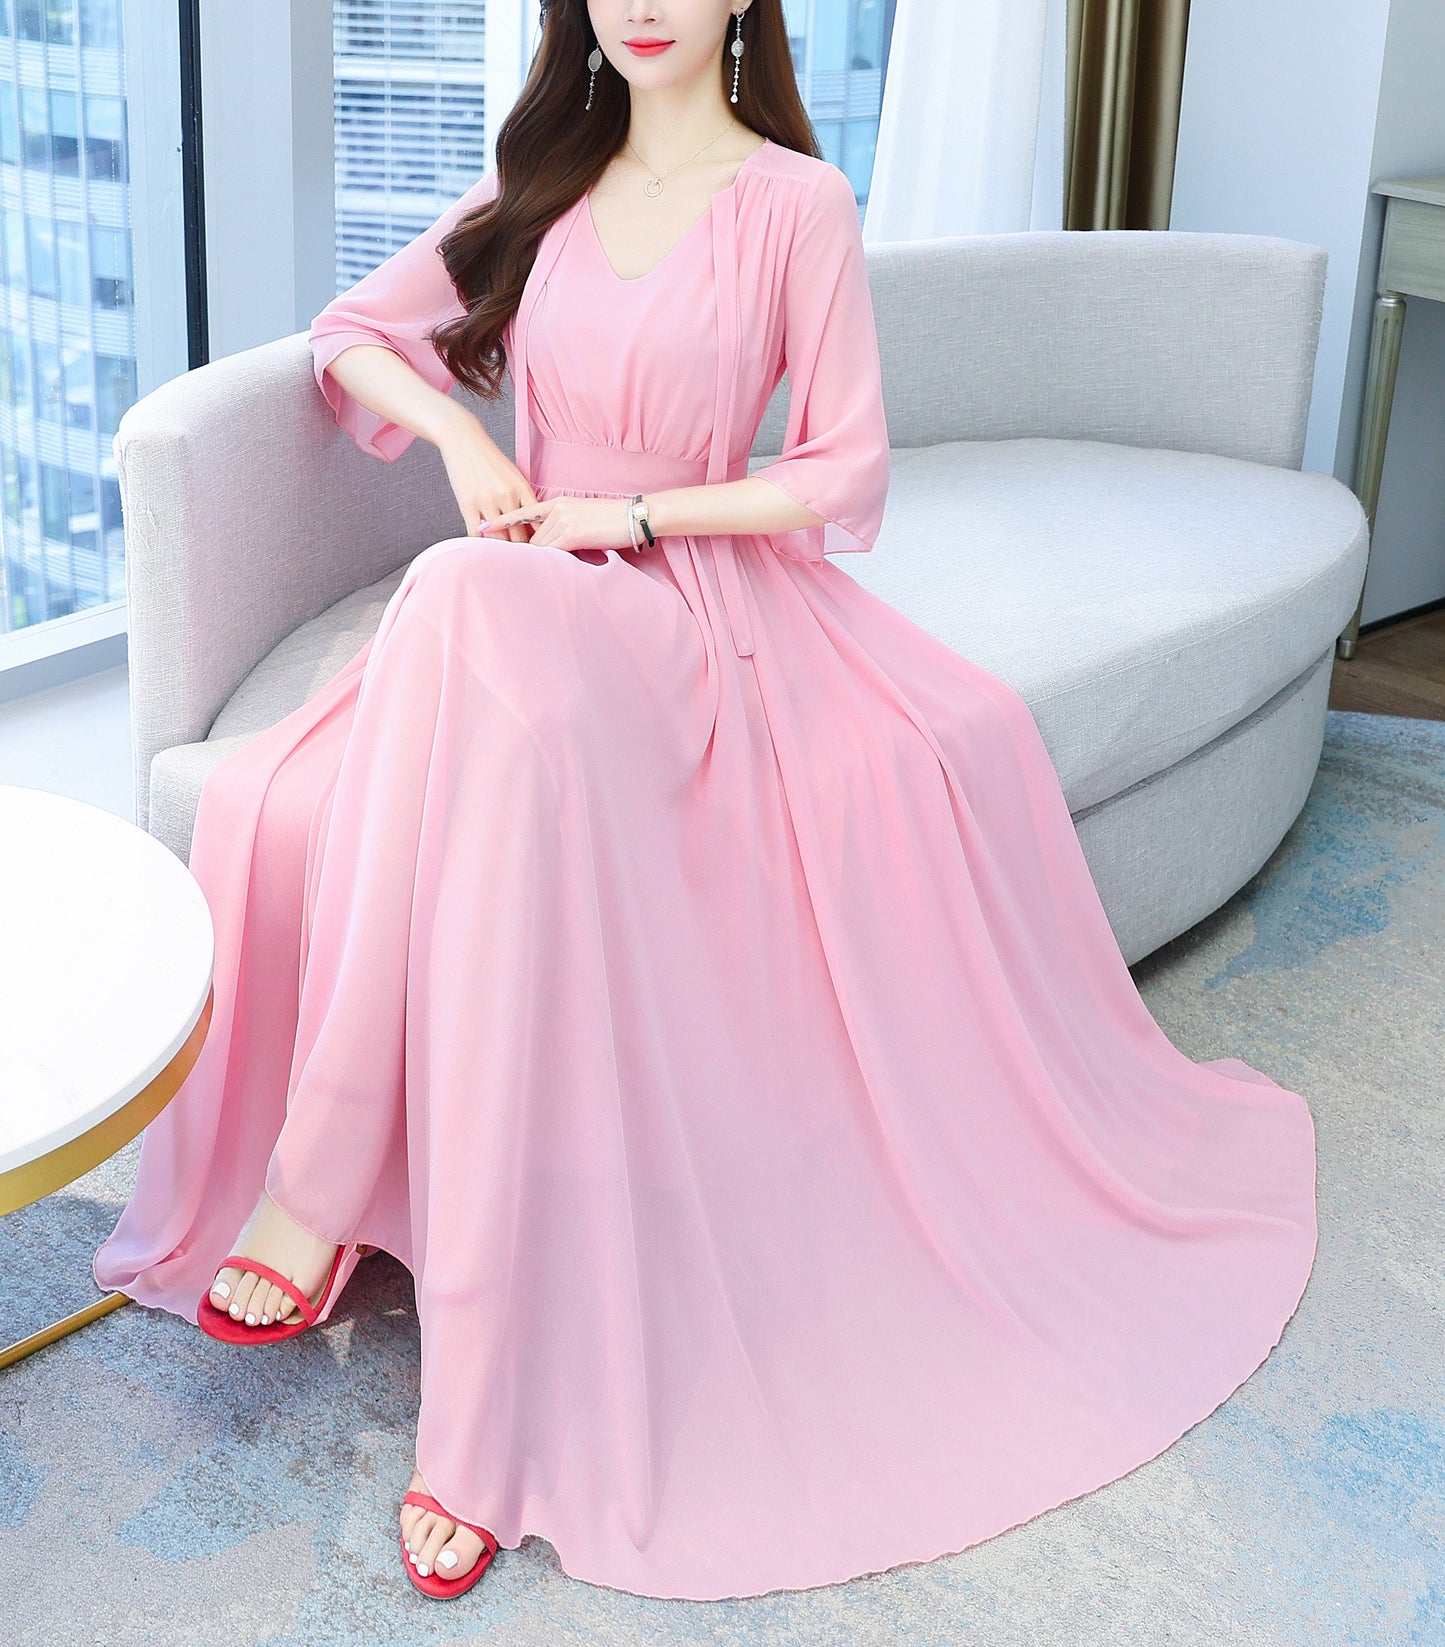 Classic Solid Color V-Neck with Bow Tie Elegant Maxi Dress